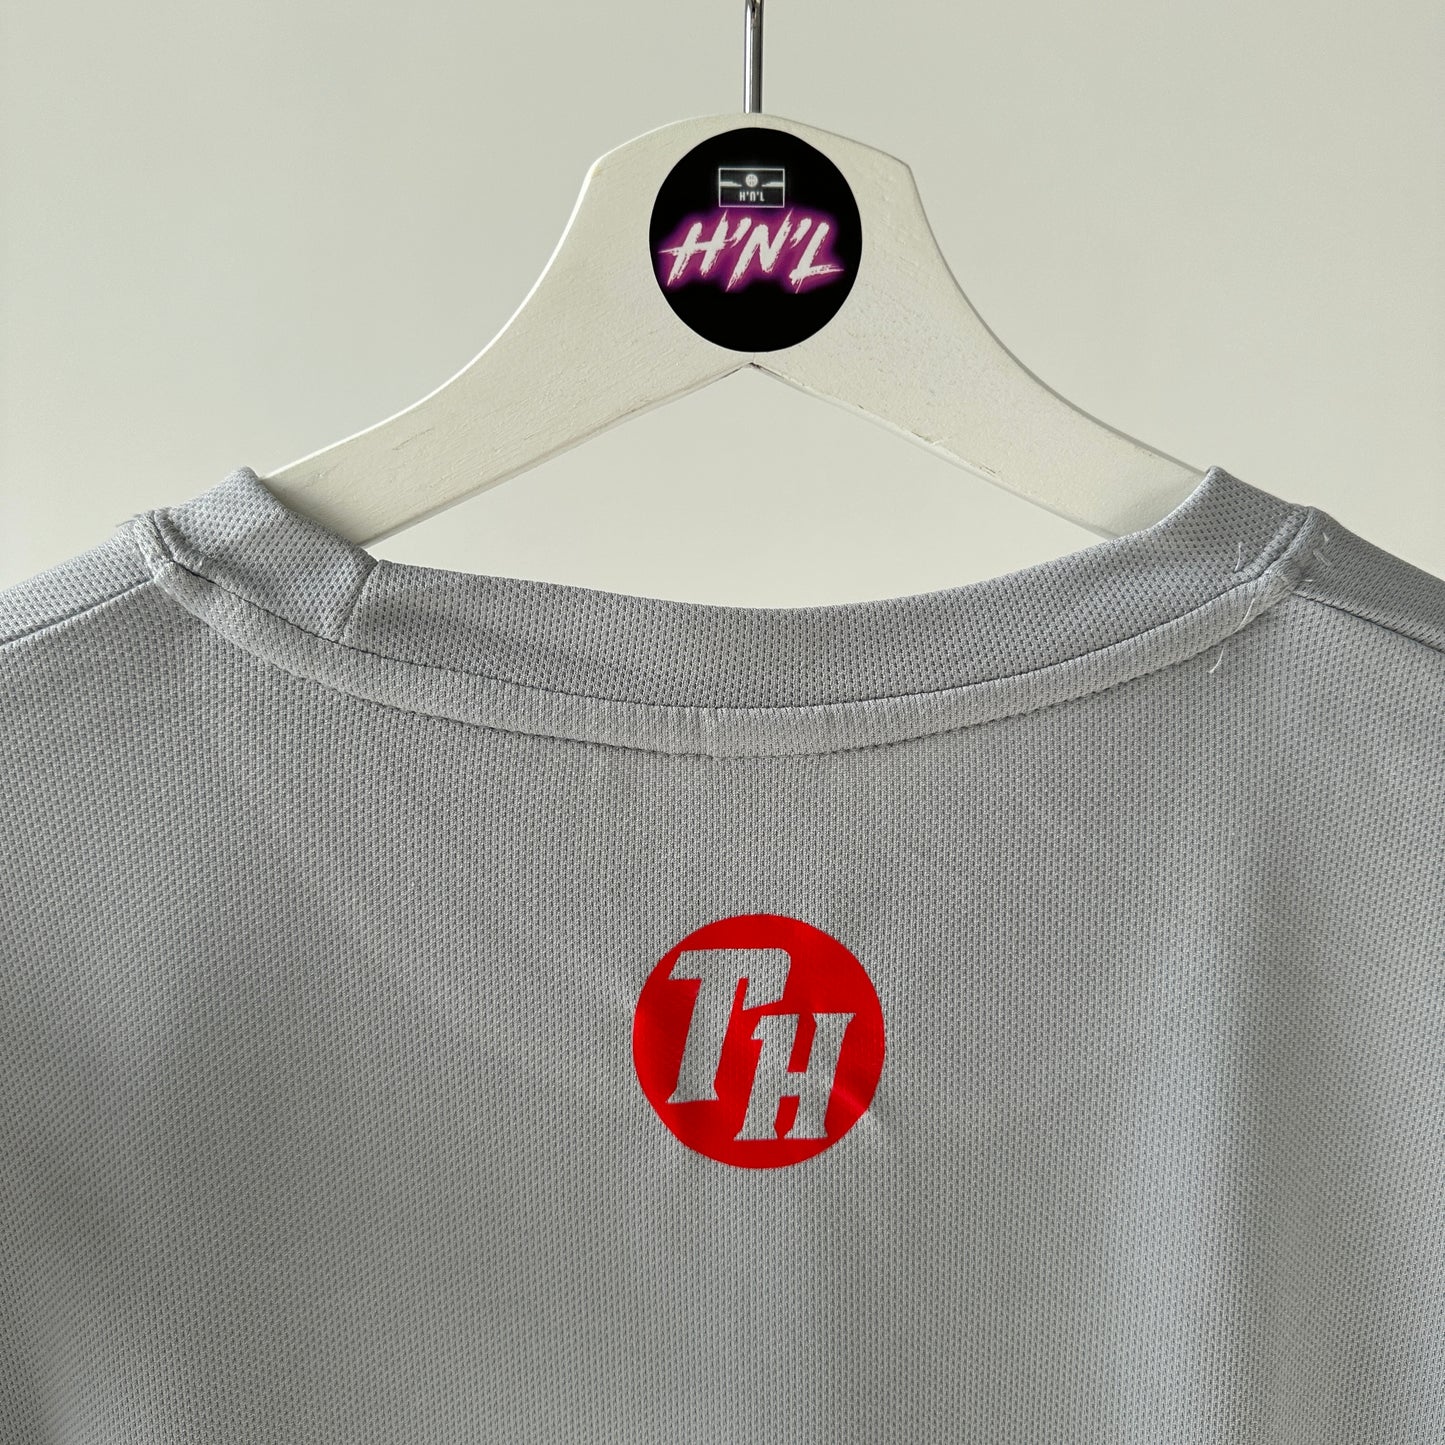 Thinking Hoops Leap Year Performance Tee